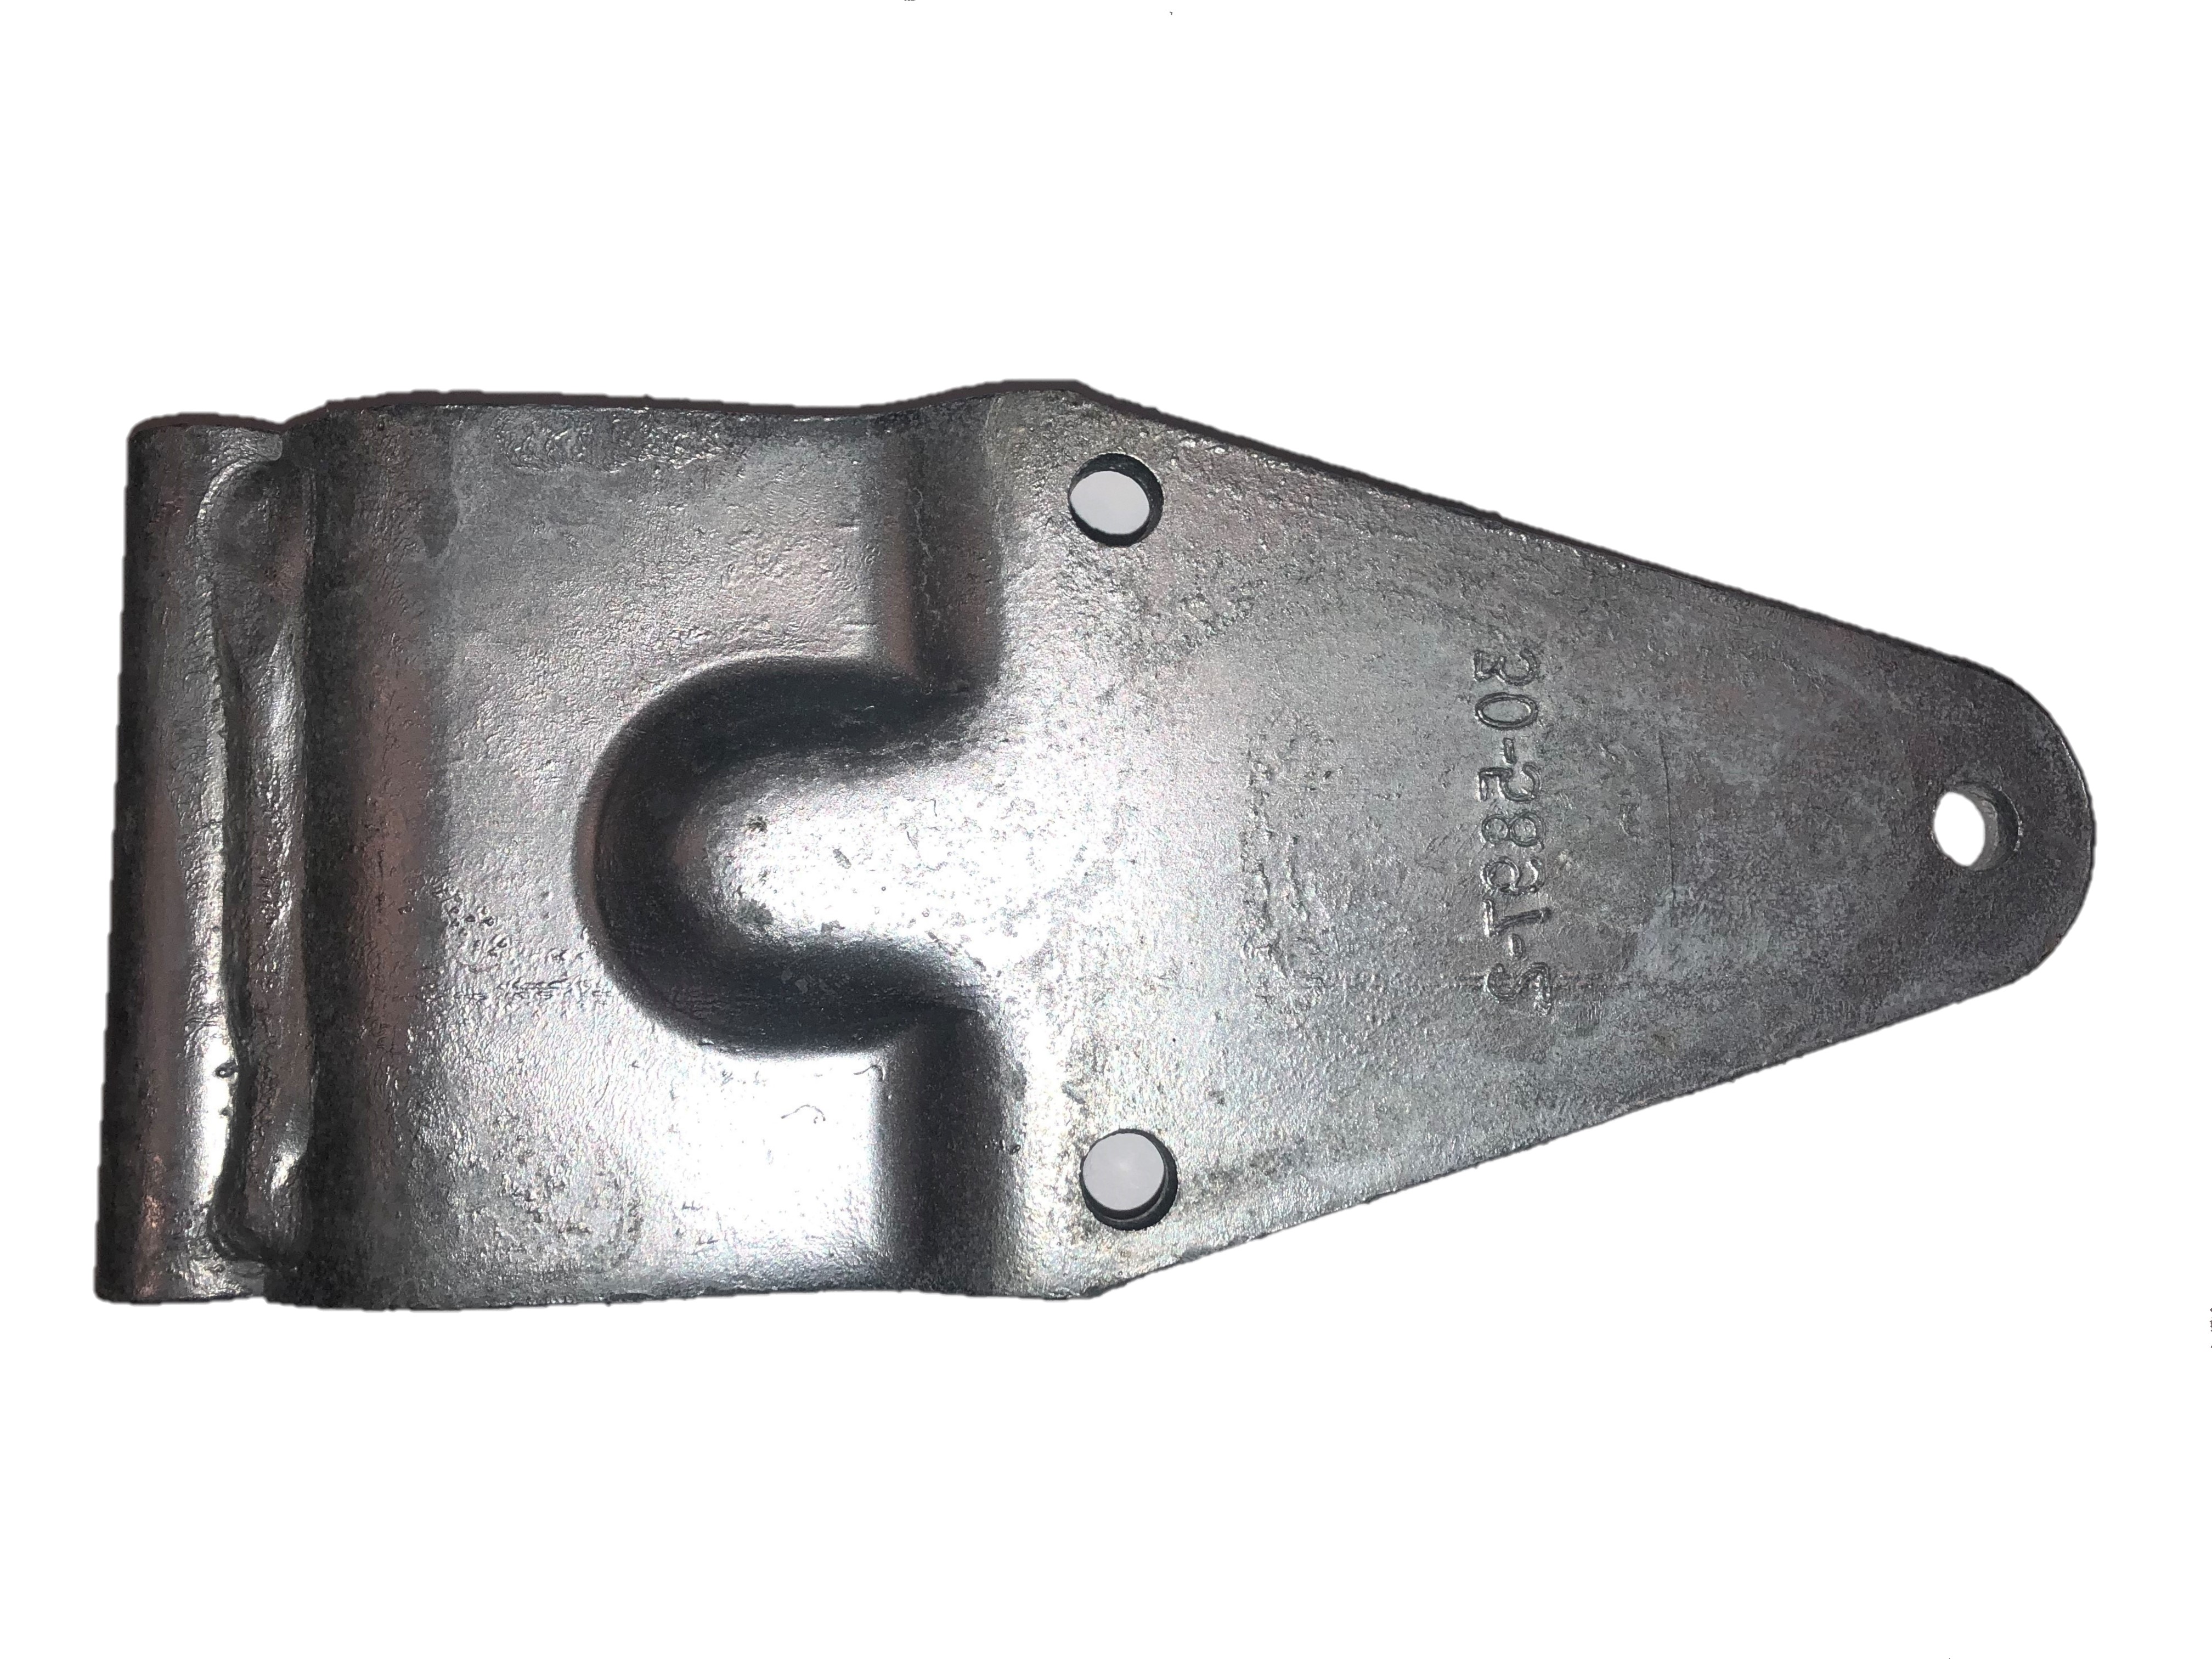 Carbon steel hinge strap with galvanized finish 30-5897-50-13